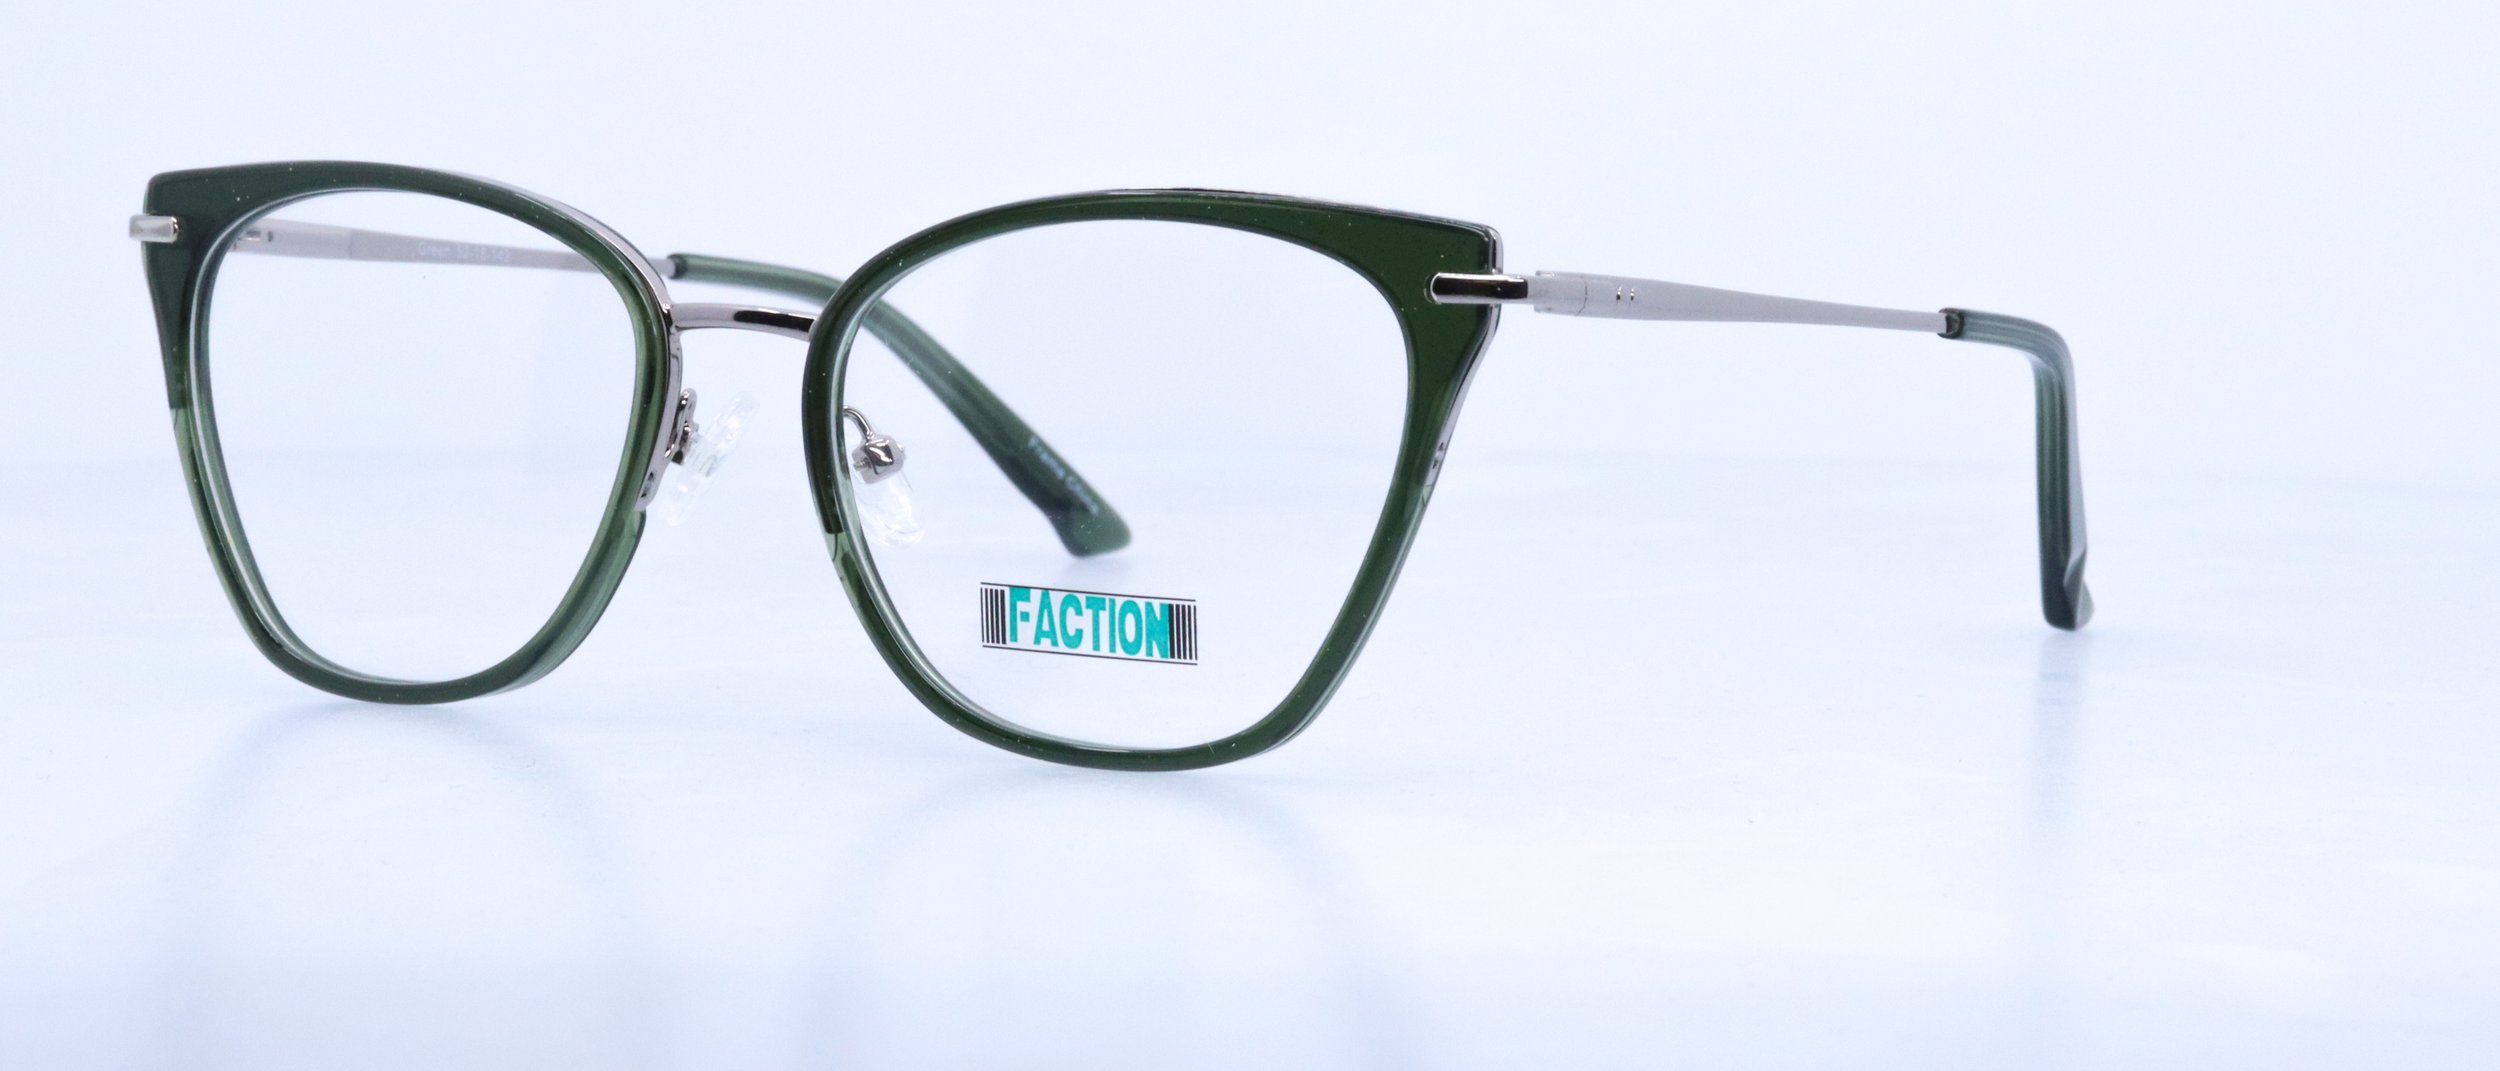  FN905: 52-18-143, Available in Black or Green 